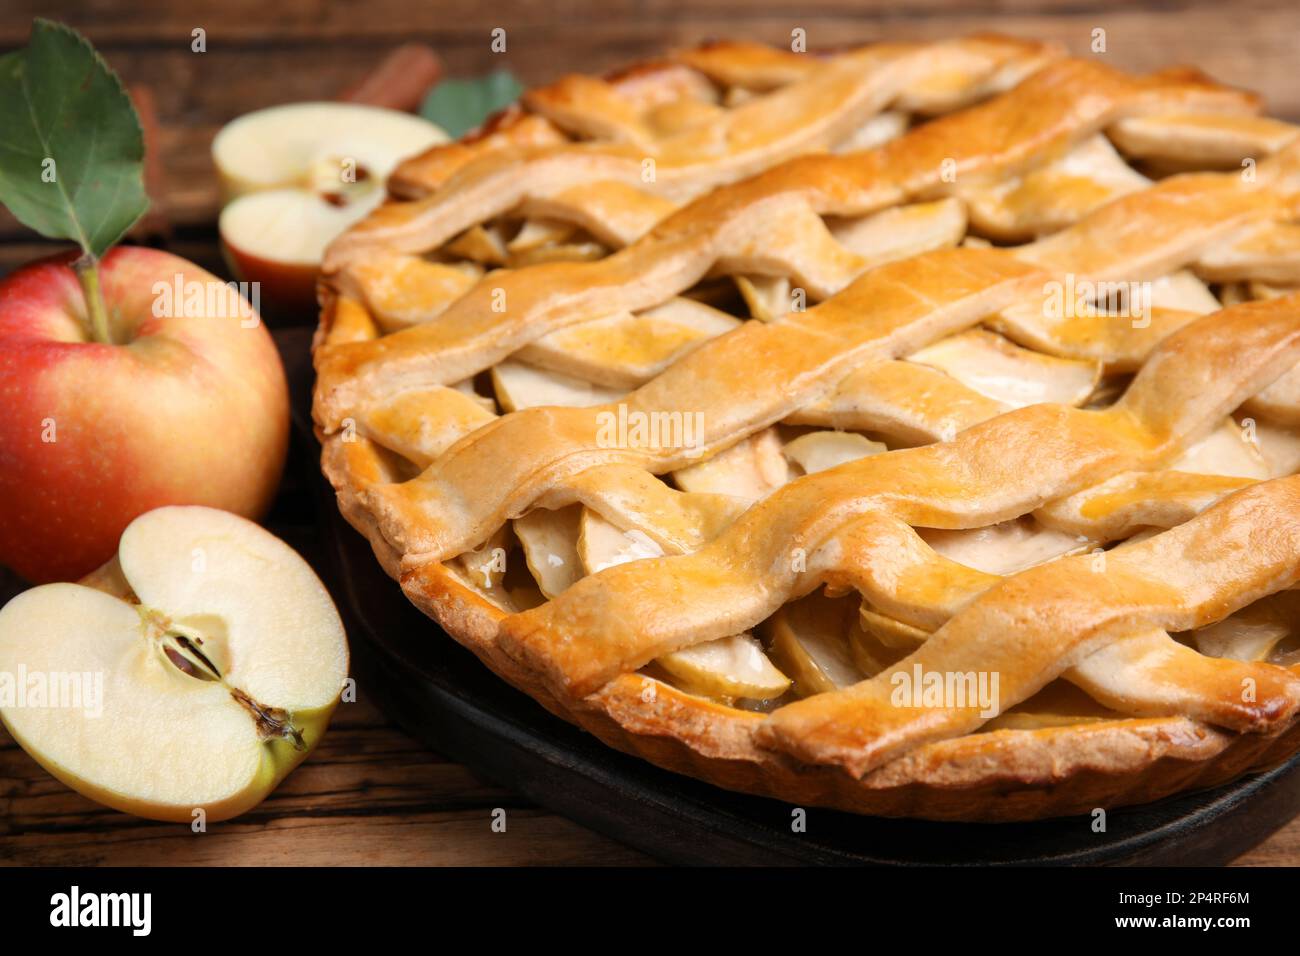 Delicious traditional apple pie on wooden table, closeup Stock Photo